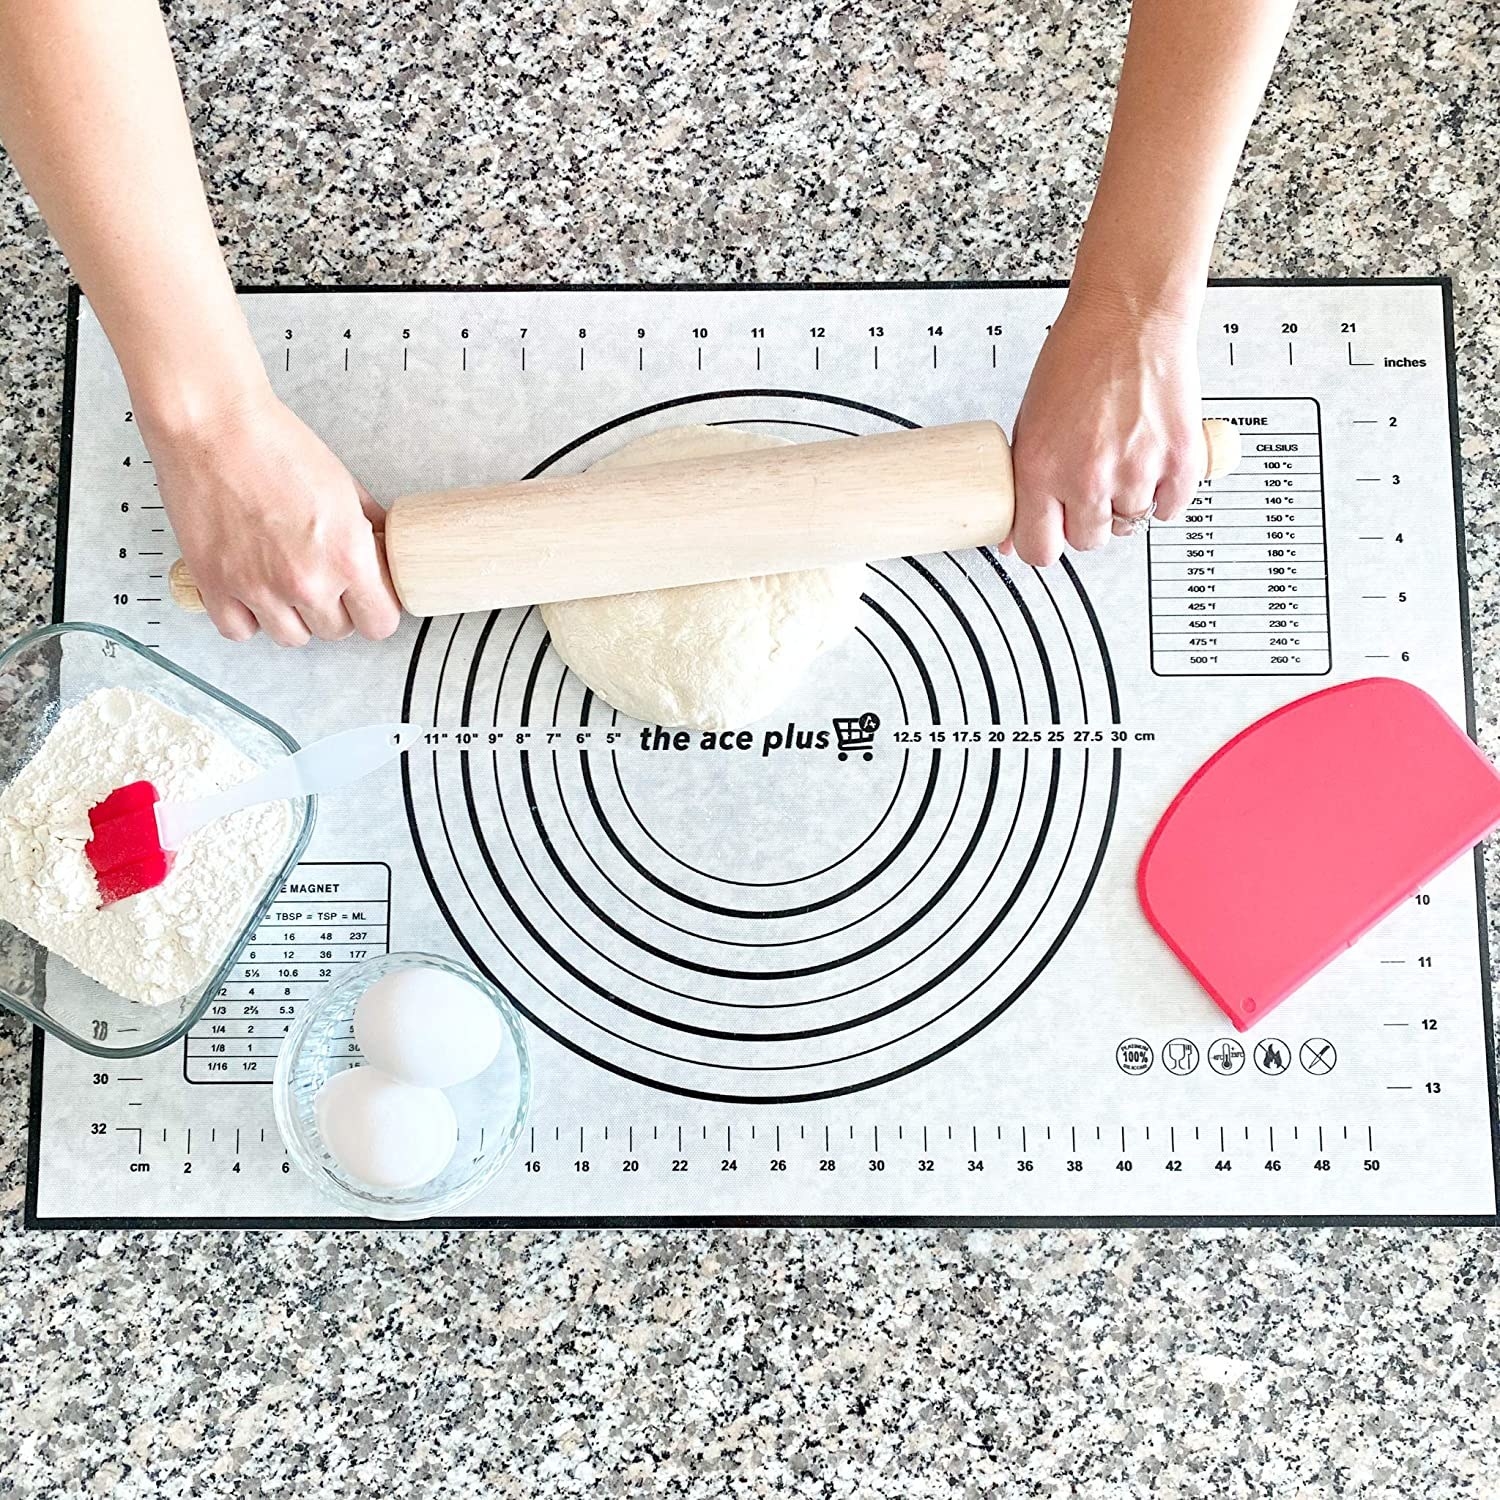 A person rolling out dough on a silicone baking mat